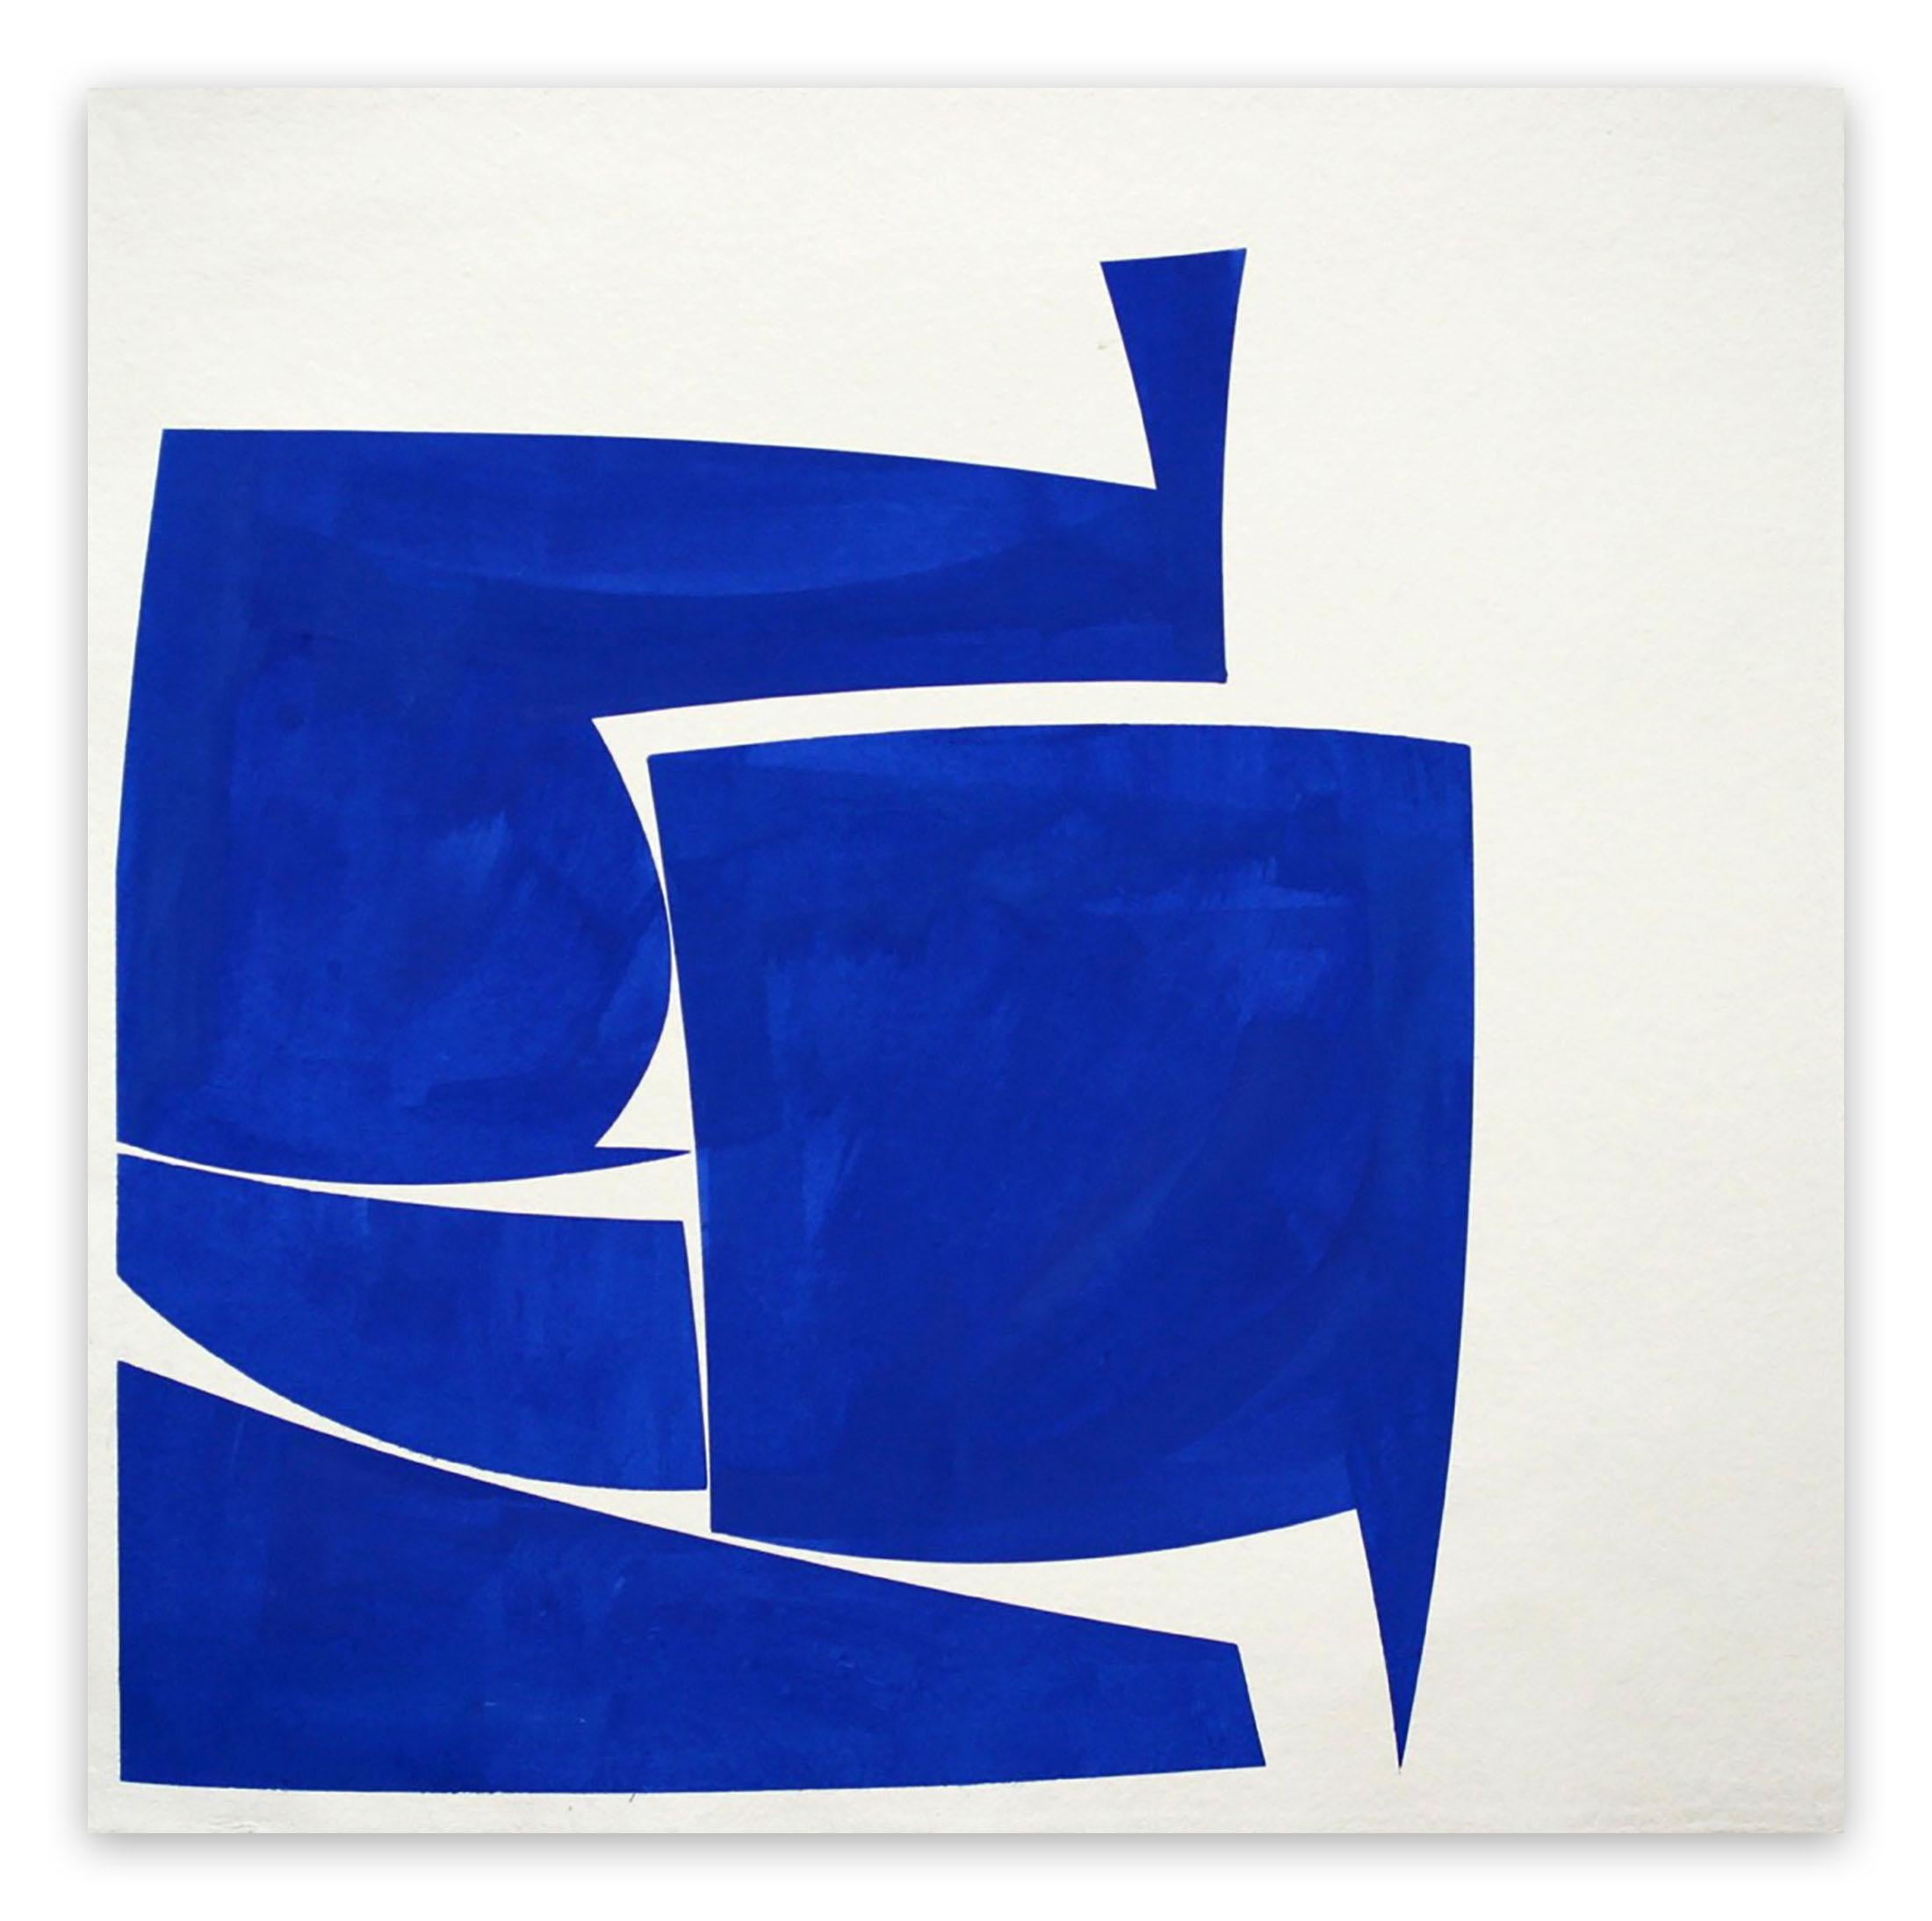 Covers 24 Blue A Summer (Abstract Painting)

Gouache on handmade Khadi paper - Unframed.

Joanne Freeman's works on paper are made with gouache on handmade Indian Khadi paper.
She uses tape to mask out shapes and employ hard edges, working